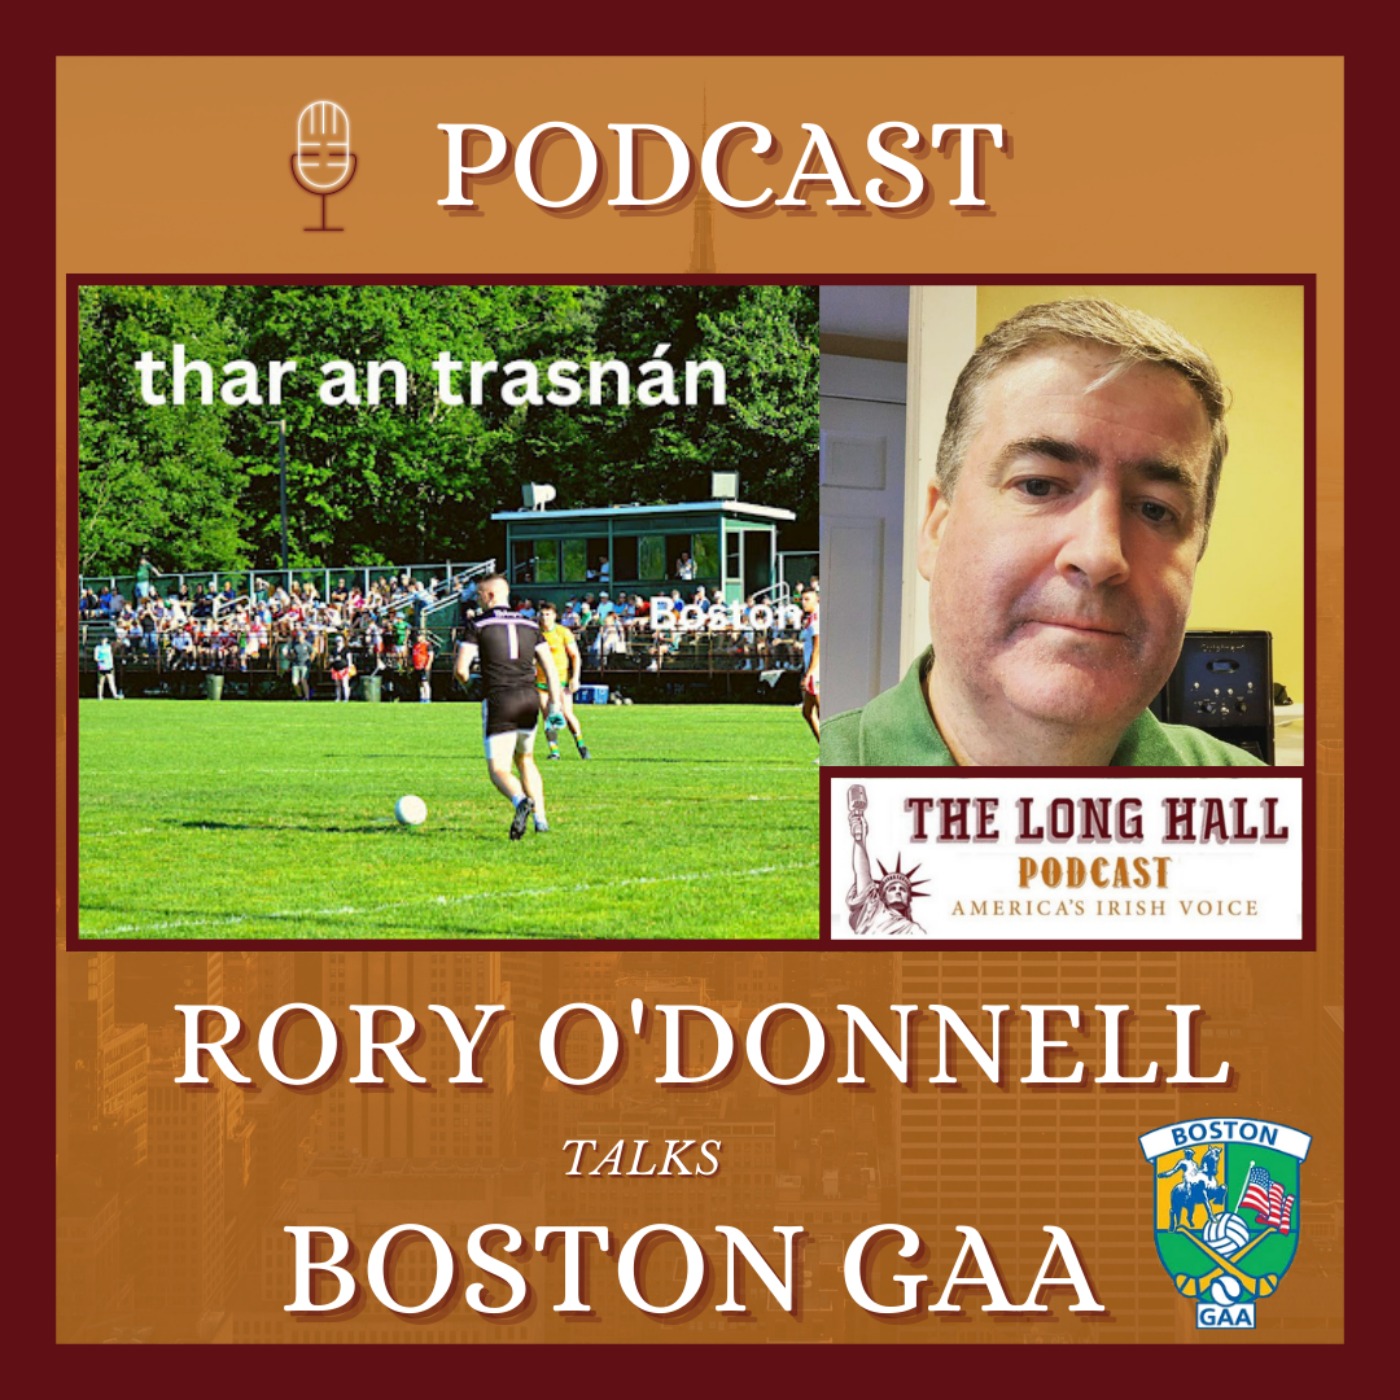 Boston Northeastern GAA Championships with Rory O’Donnell of Thar an Trasnan